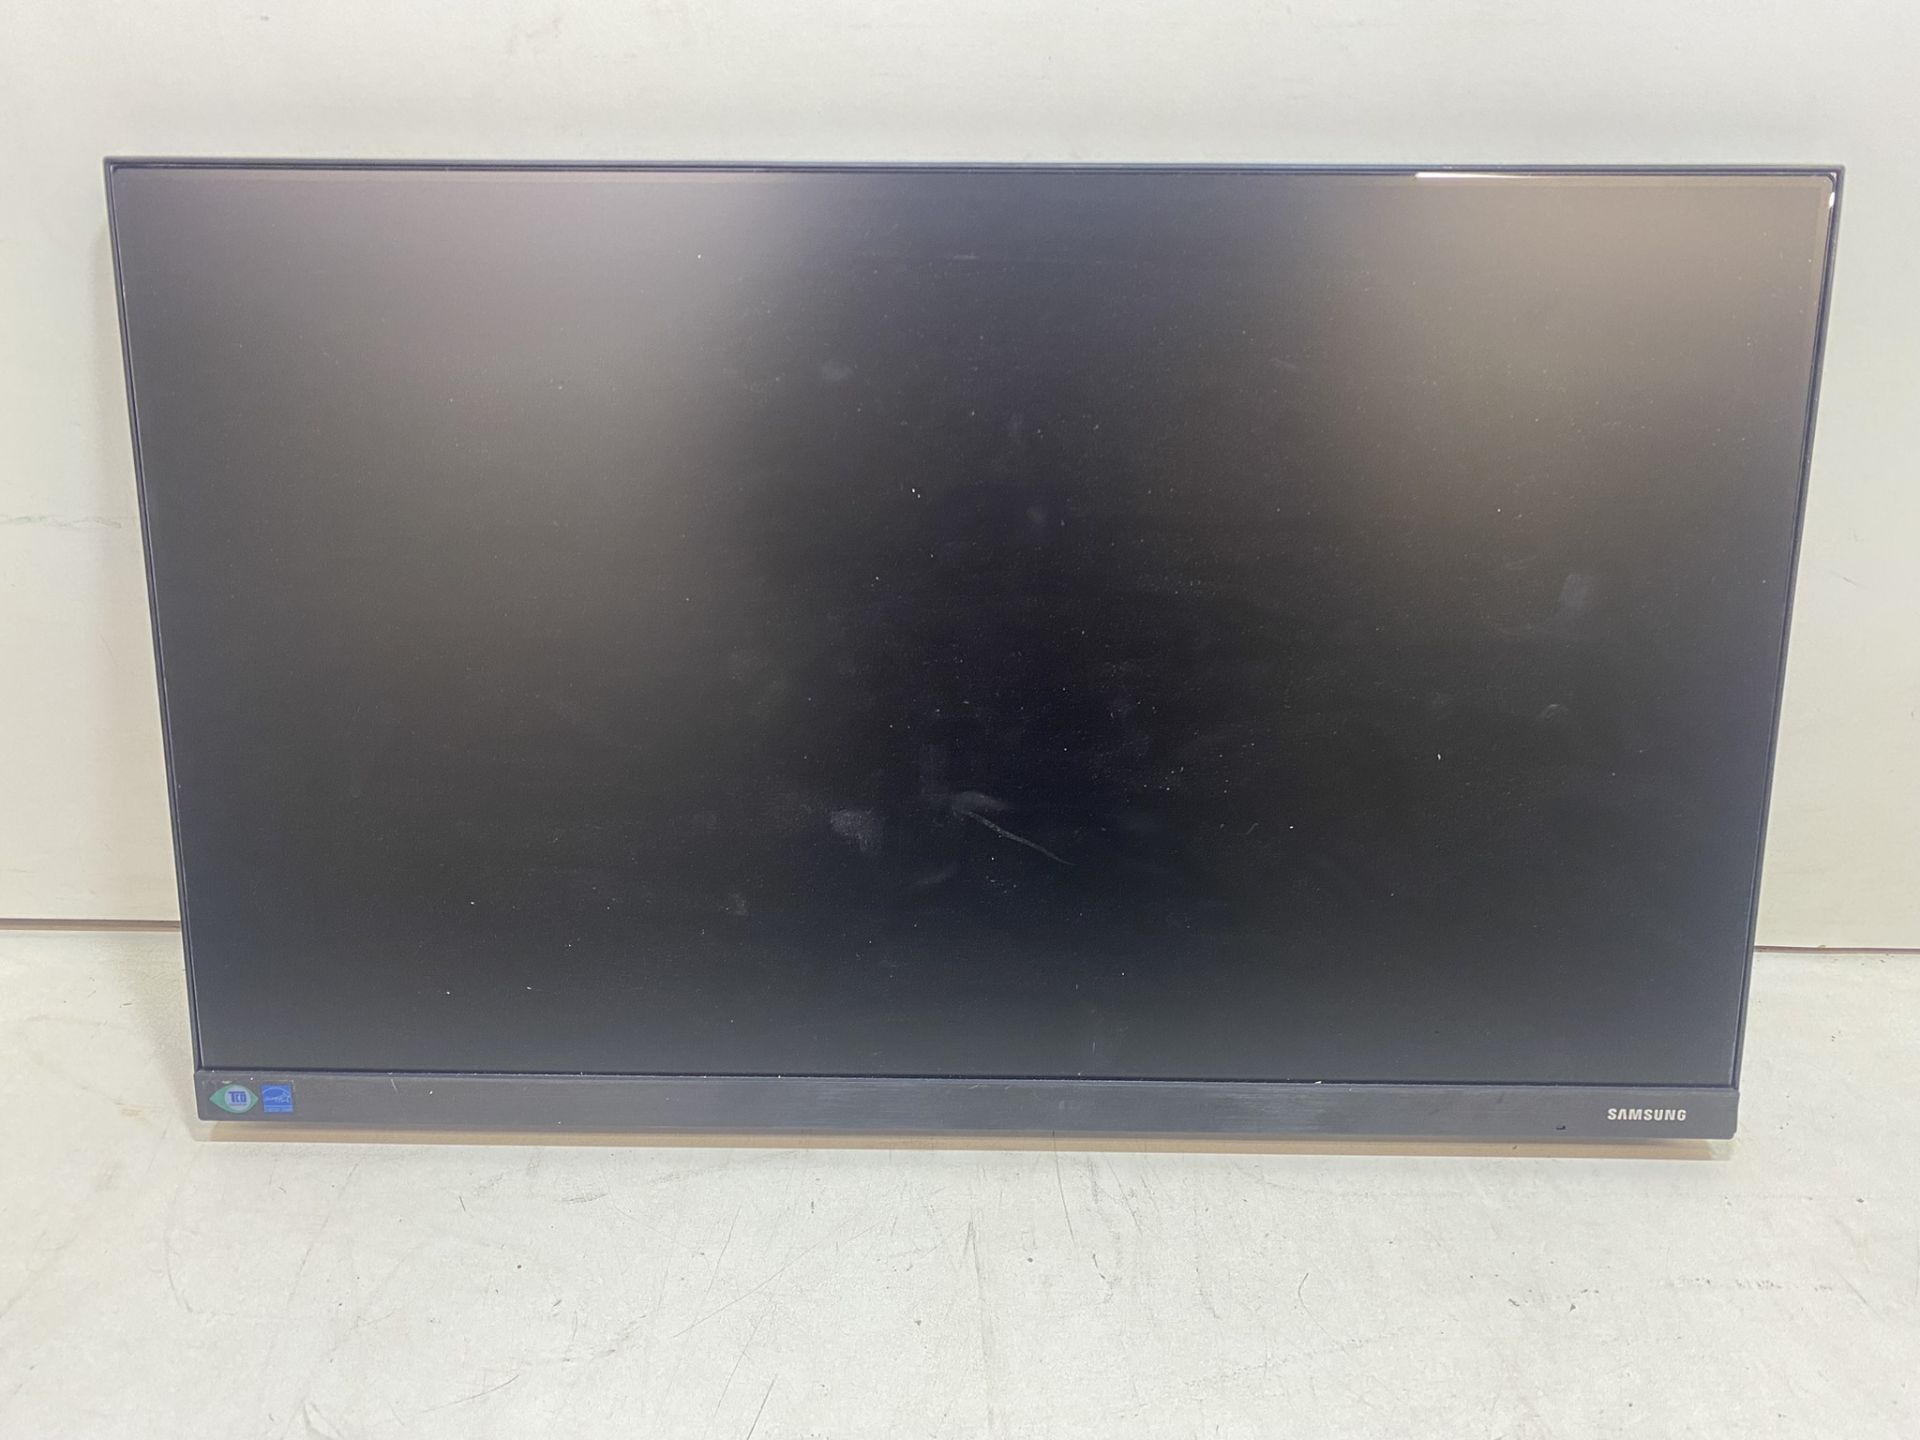 4 x Samsung F22T450FQU 22" HD LED LCD Monitor Without Stands - Image 14 of 15